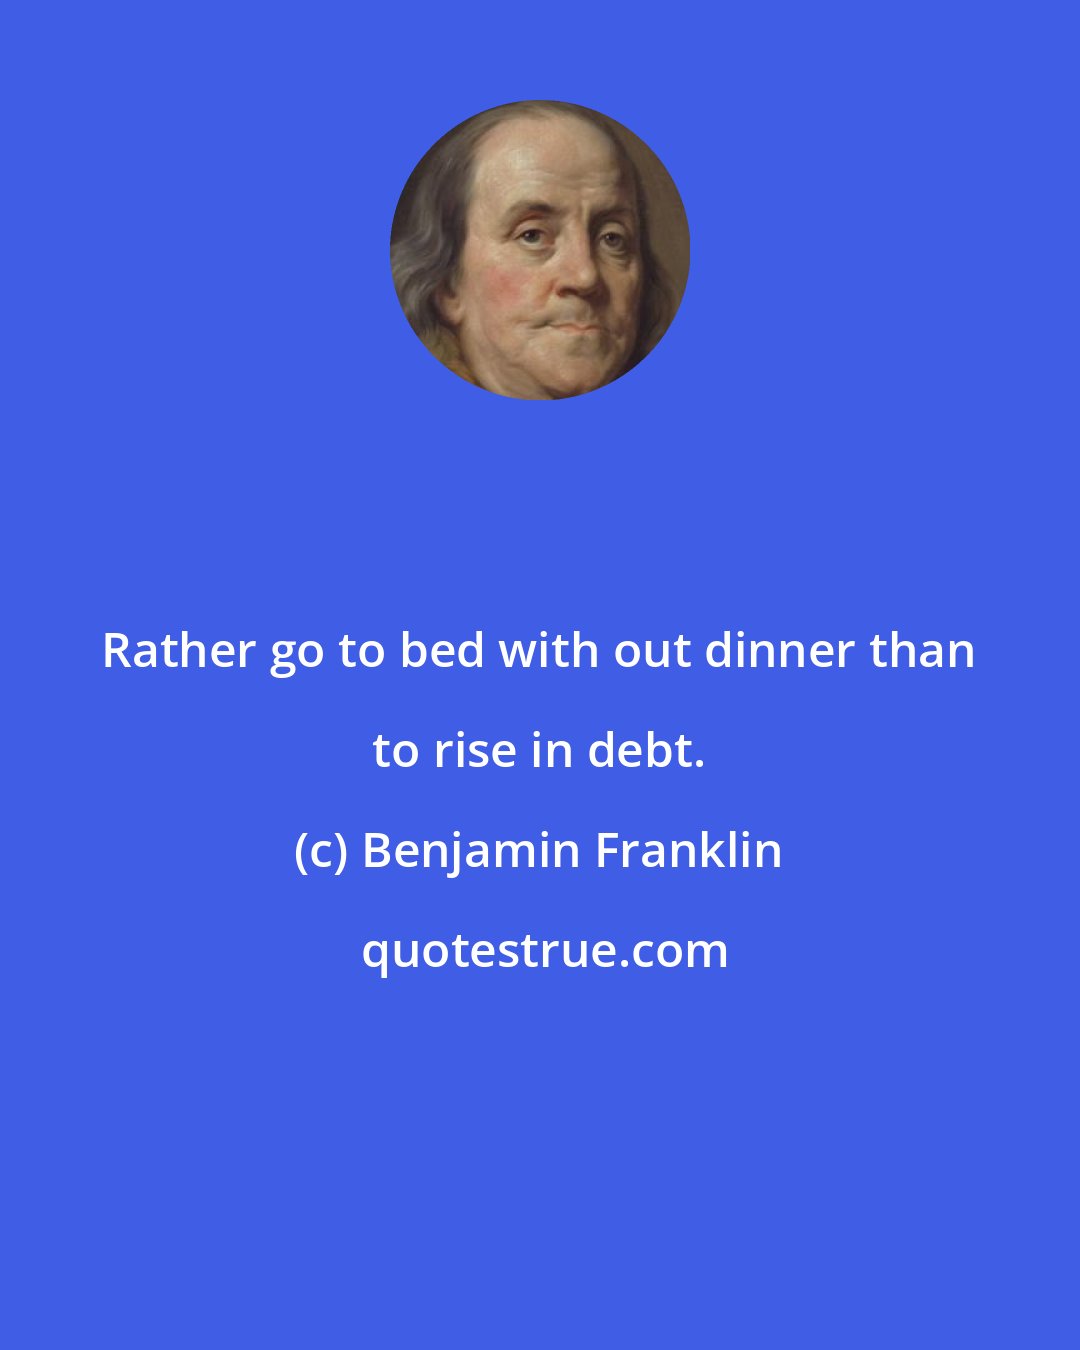 Benjamin Franklin: Rather go to bed with out dinner than to rise in debt.